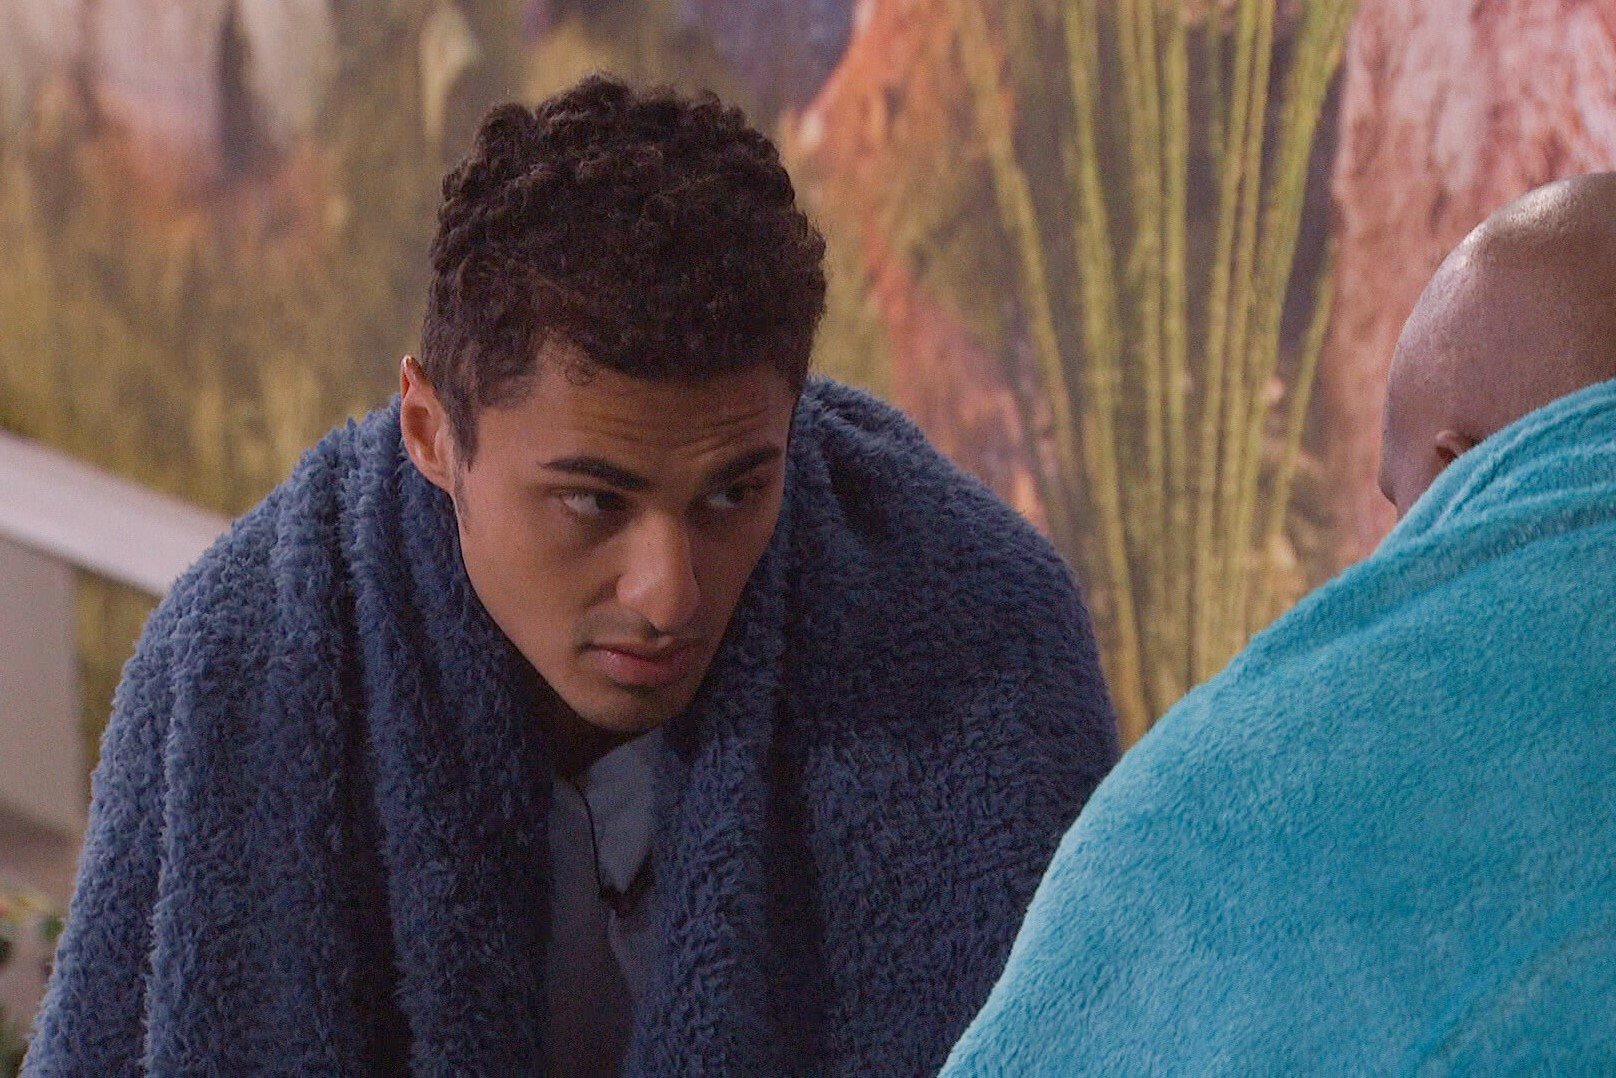 Joseph Abdin, who according to 'Big Brother 24' spoilers is still on the block after the veto ceremony, wears a dark blue blanket over his shoulders and a light blue shirt.